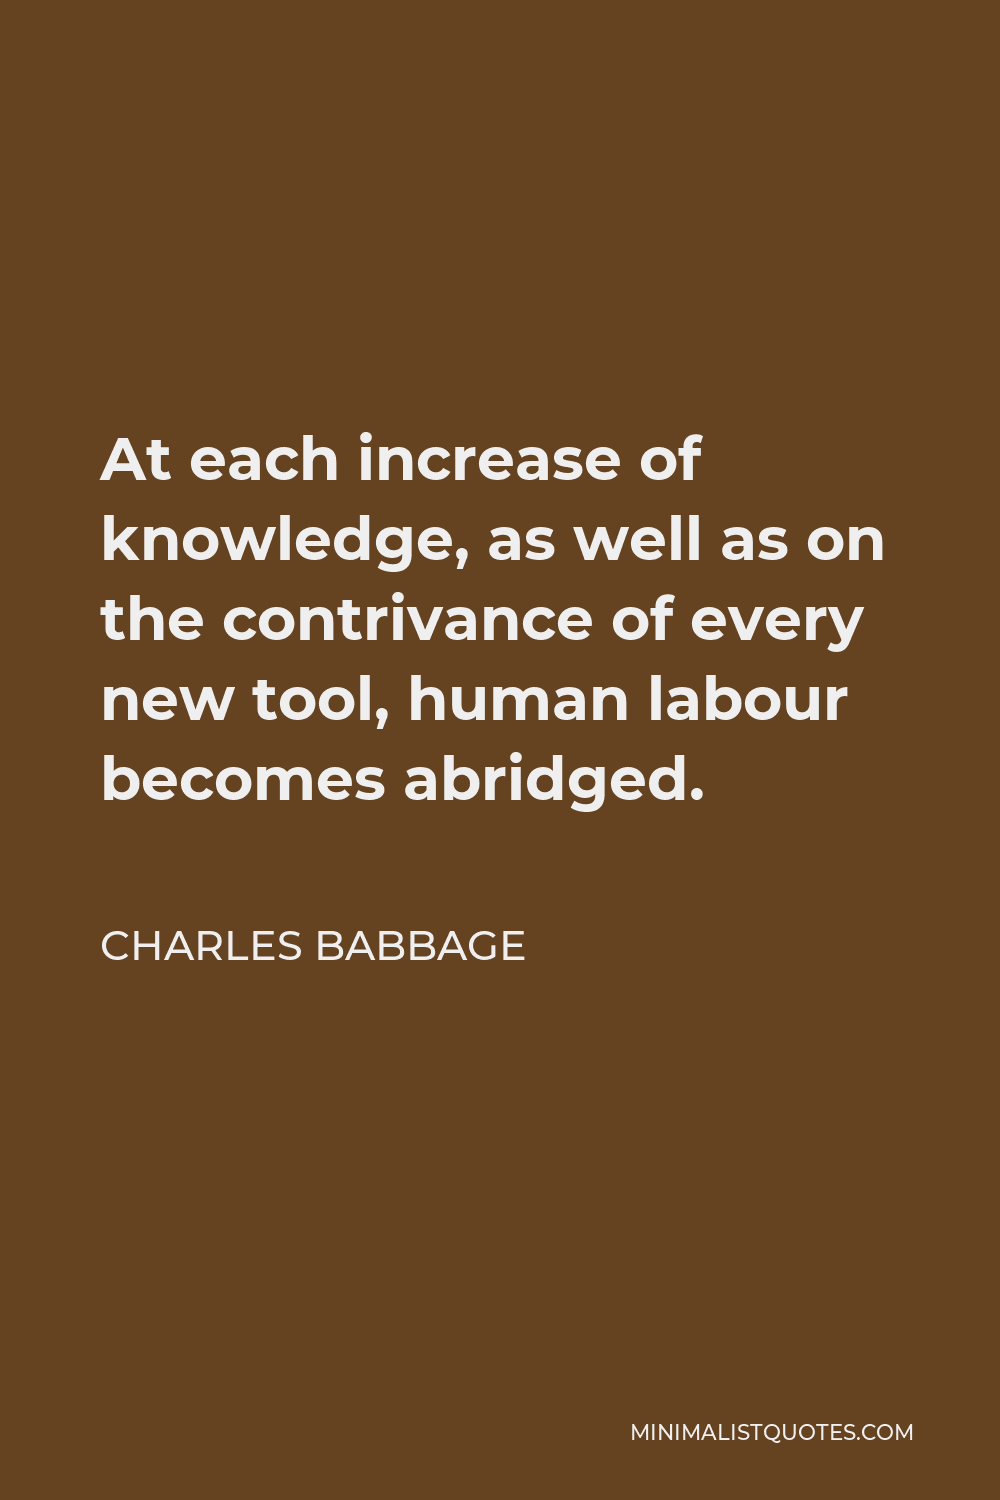 Charles Babbage Quote - At each increase of knowledge, as well as on the contrivance of every new tool, human labour becomes abridged.